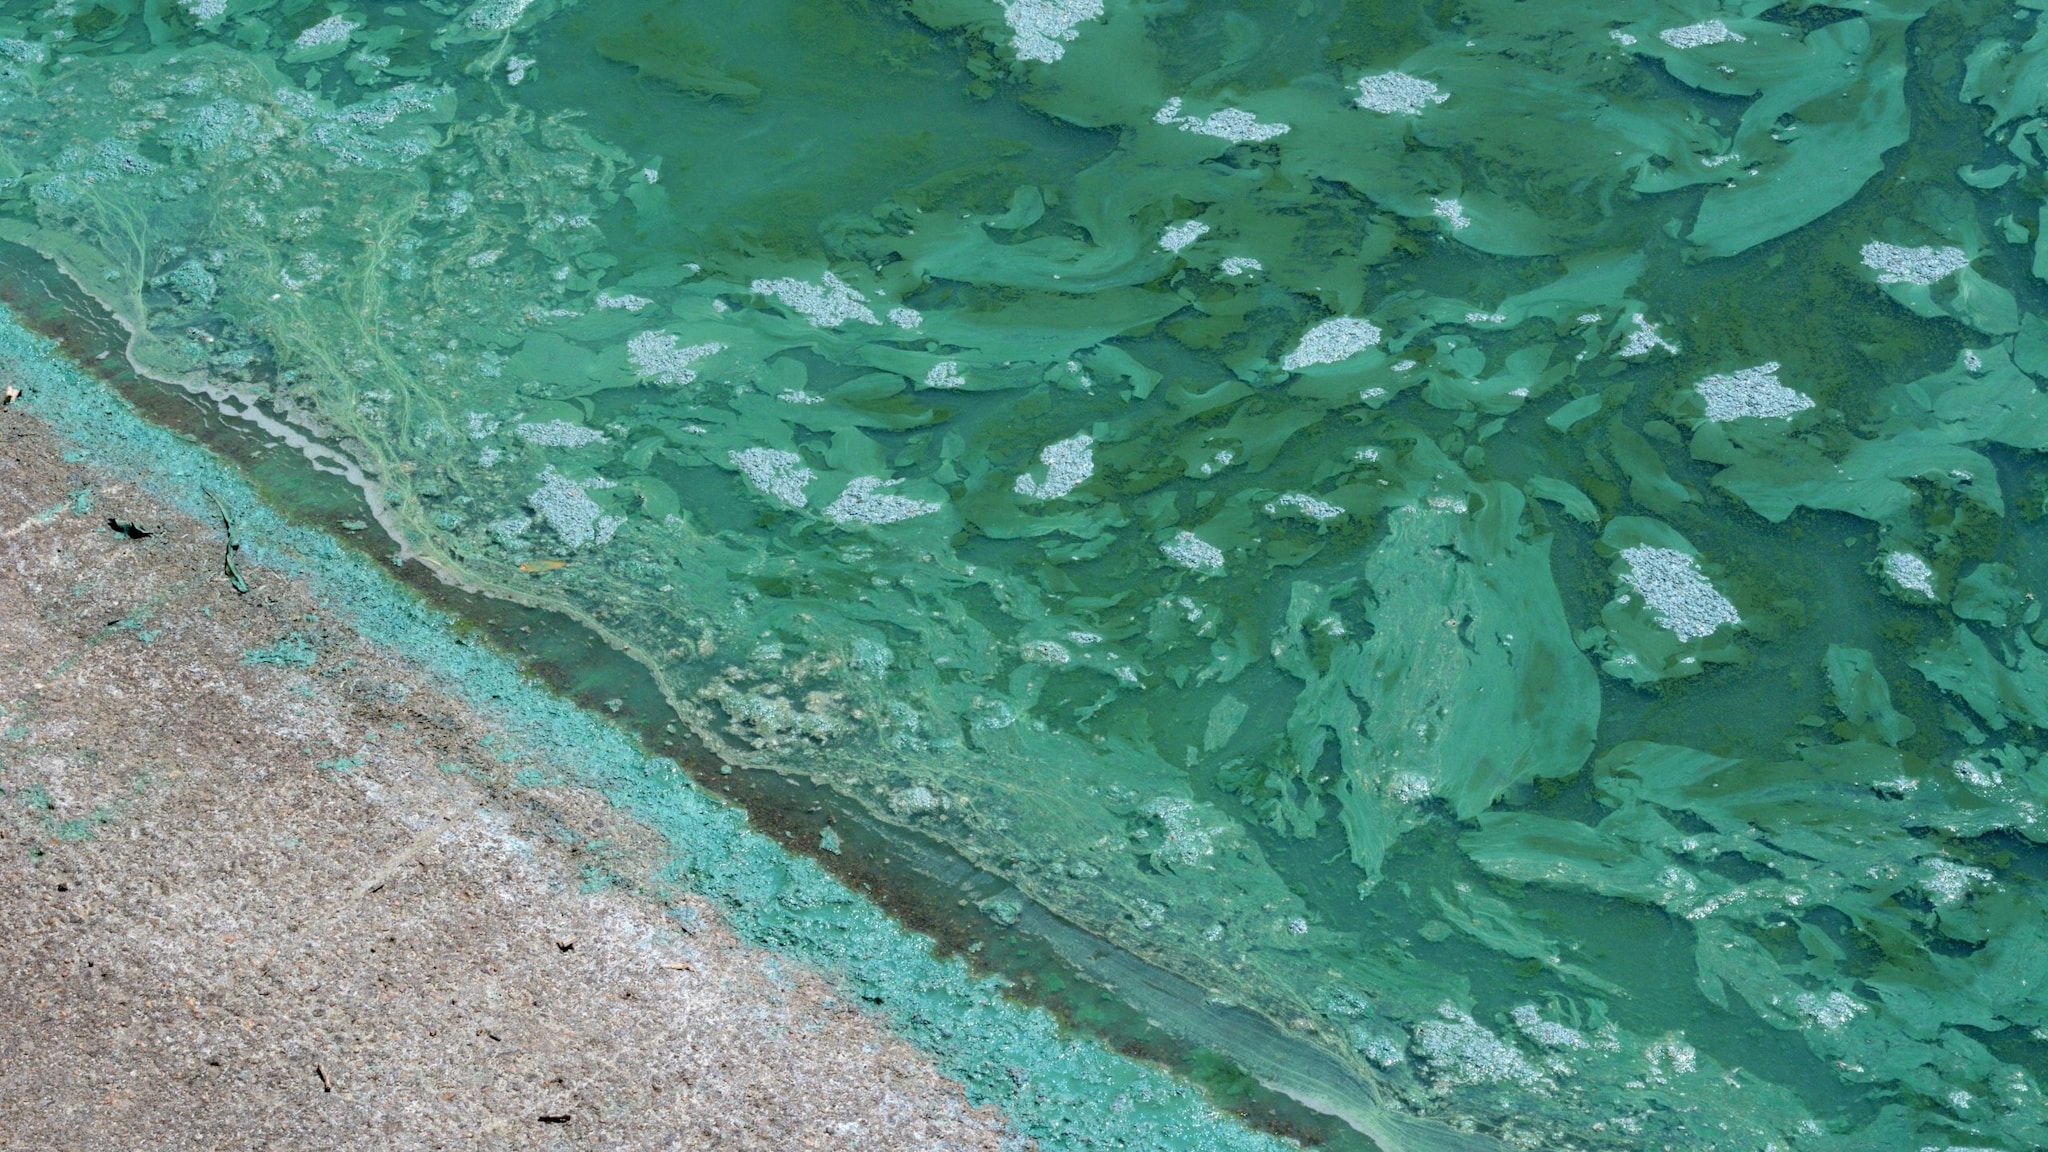 Water with blue-green algae that looks like spilled paint along a sandy shore.